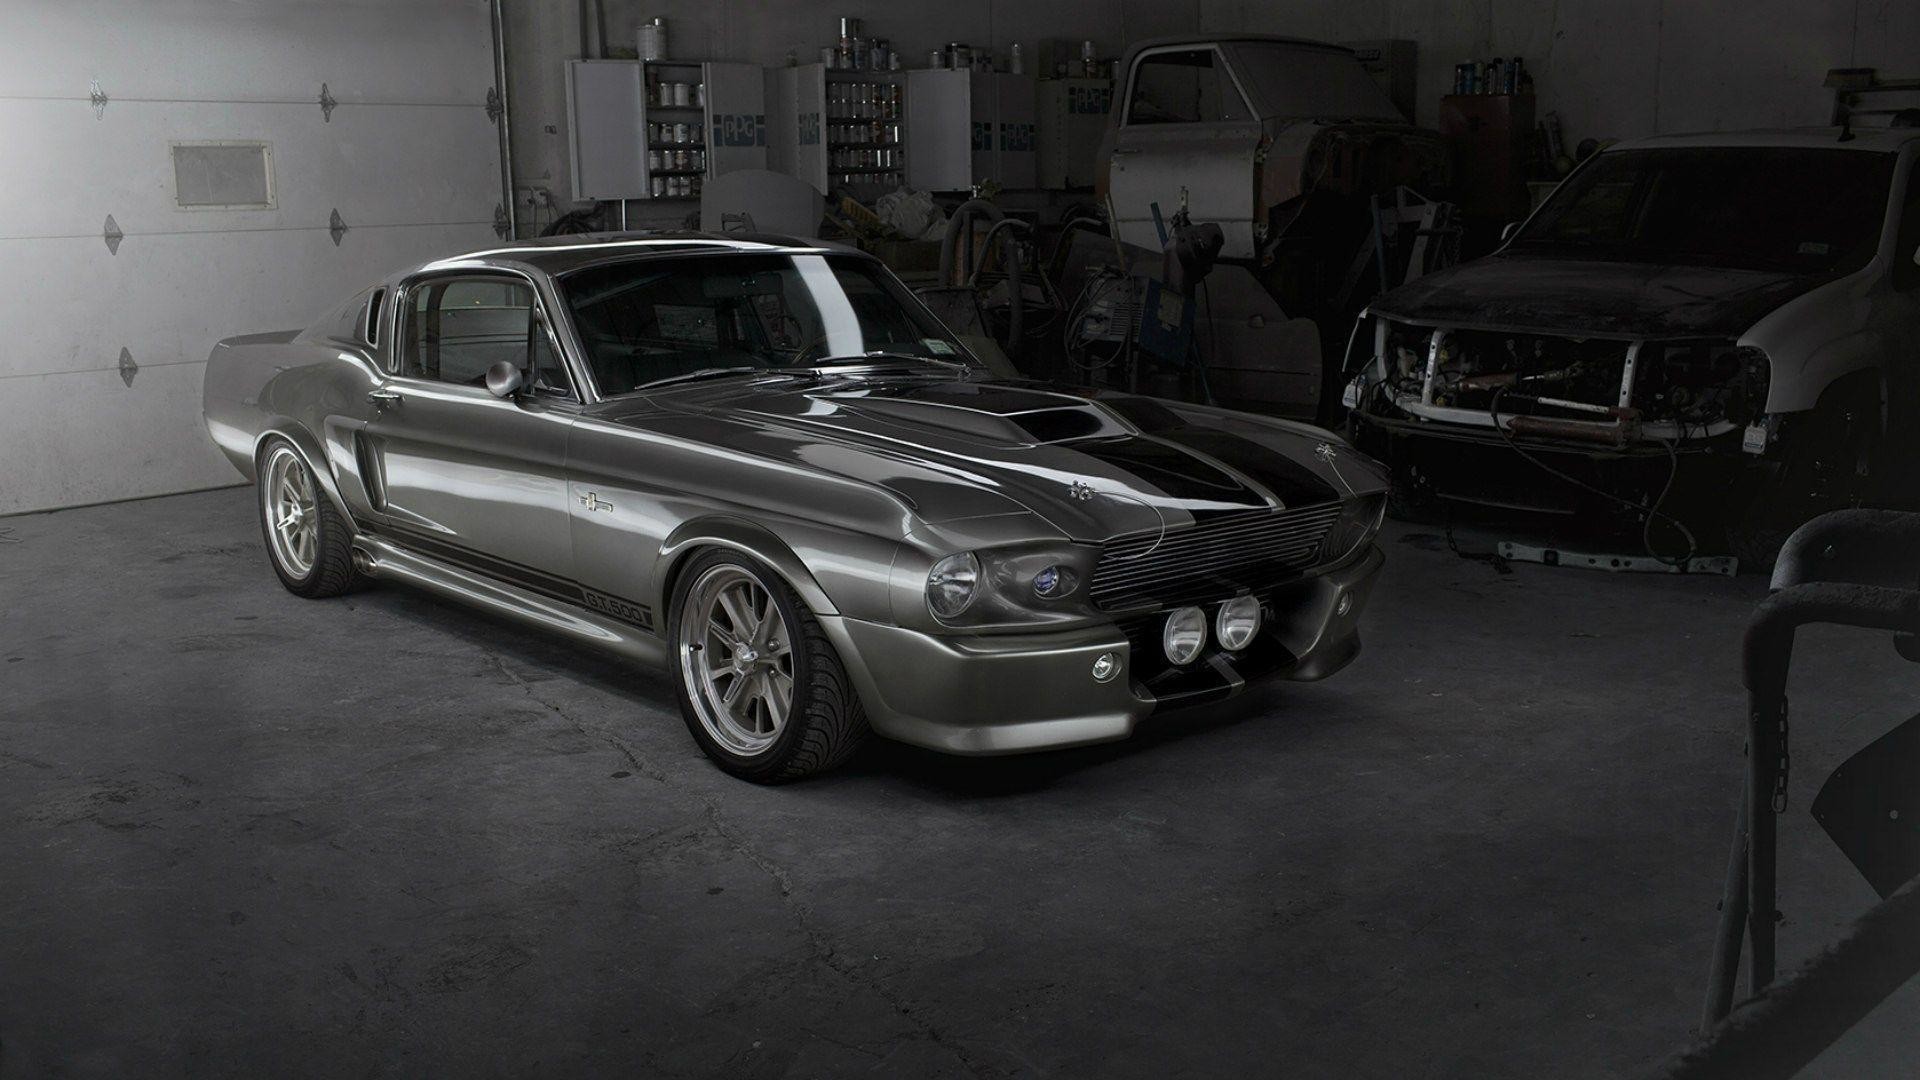 1920x1080 Ford Mustang GT500 Shelby Eleanor From Front Garage HD Wallpaper .